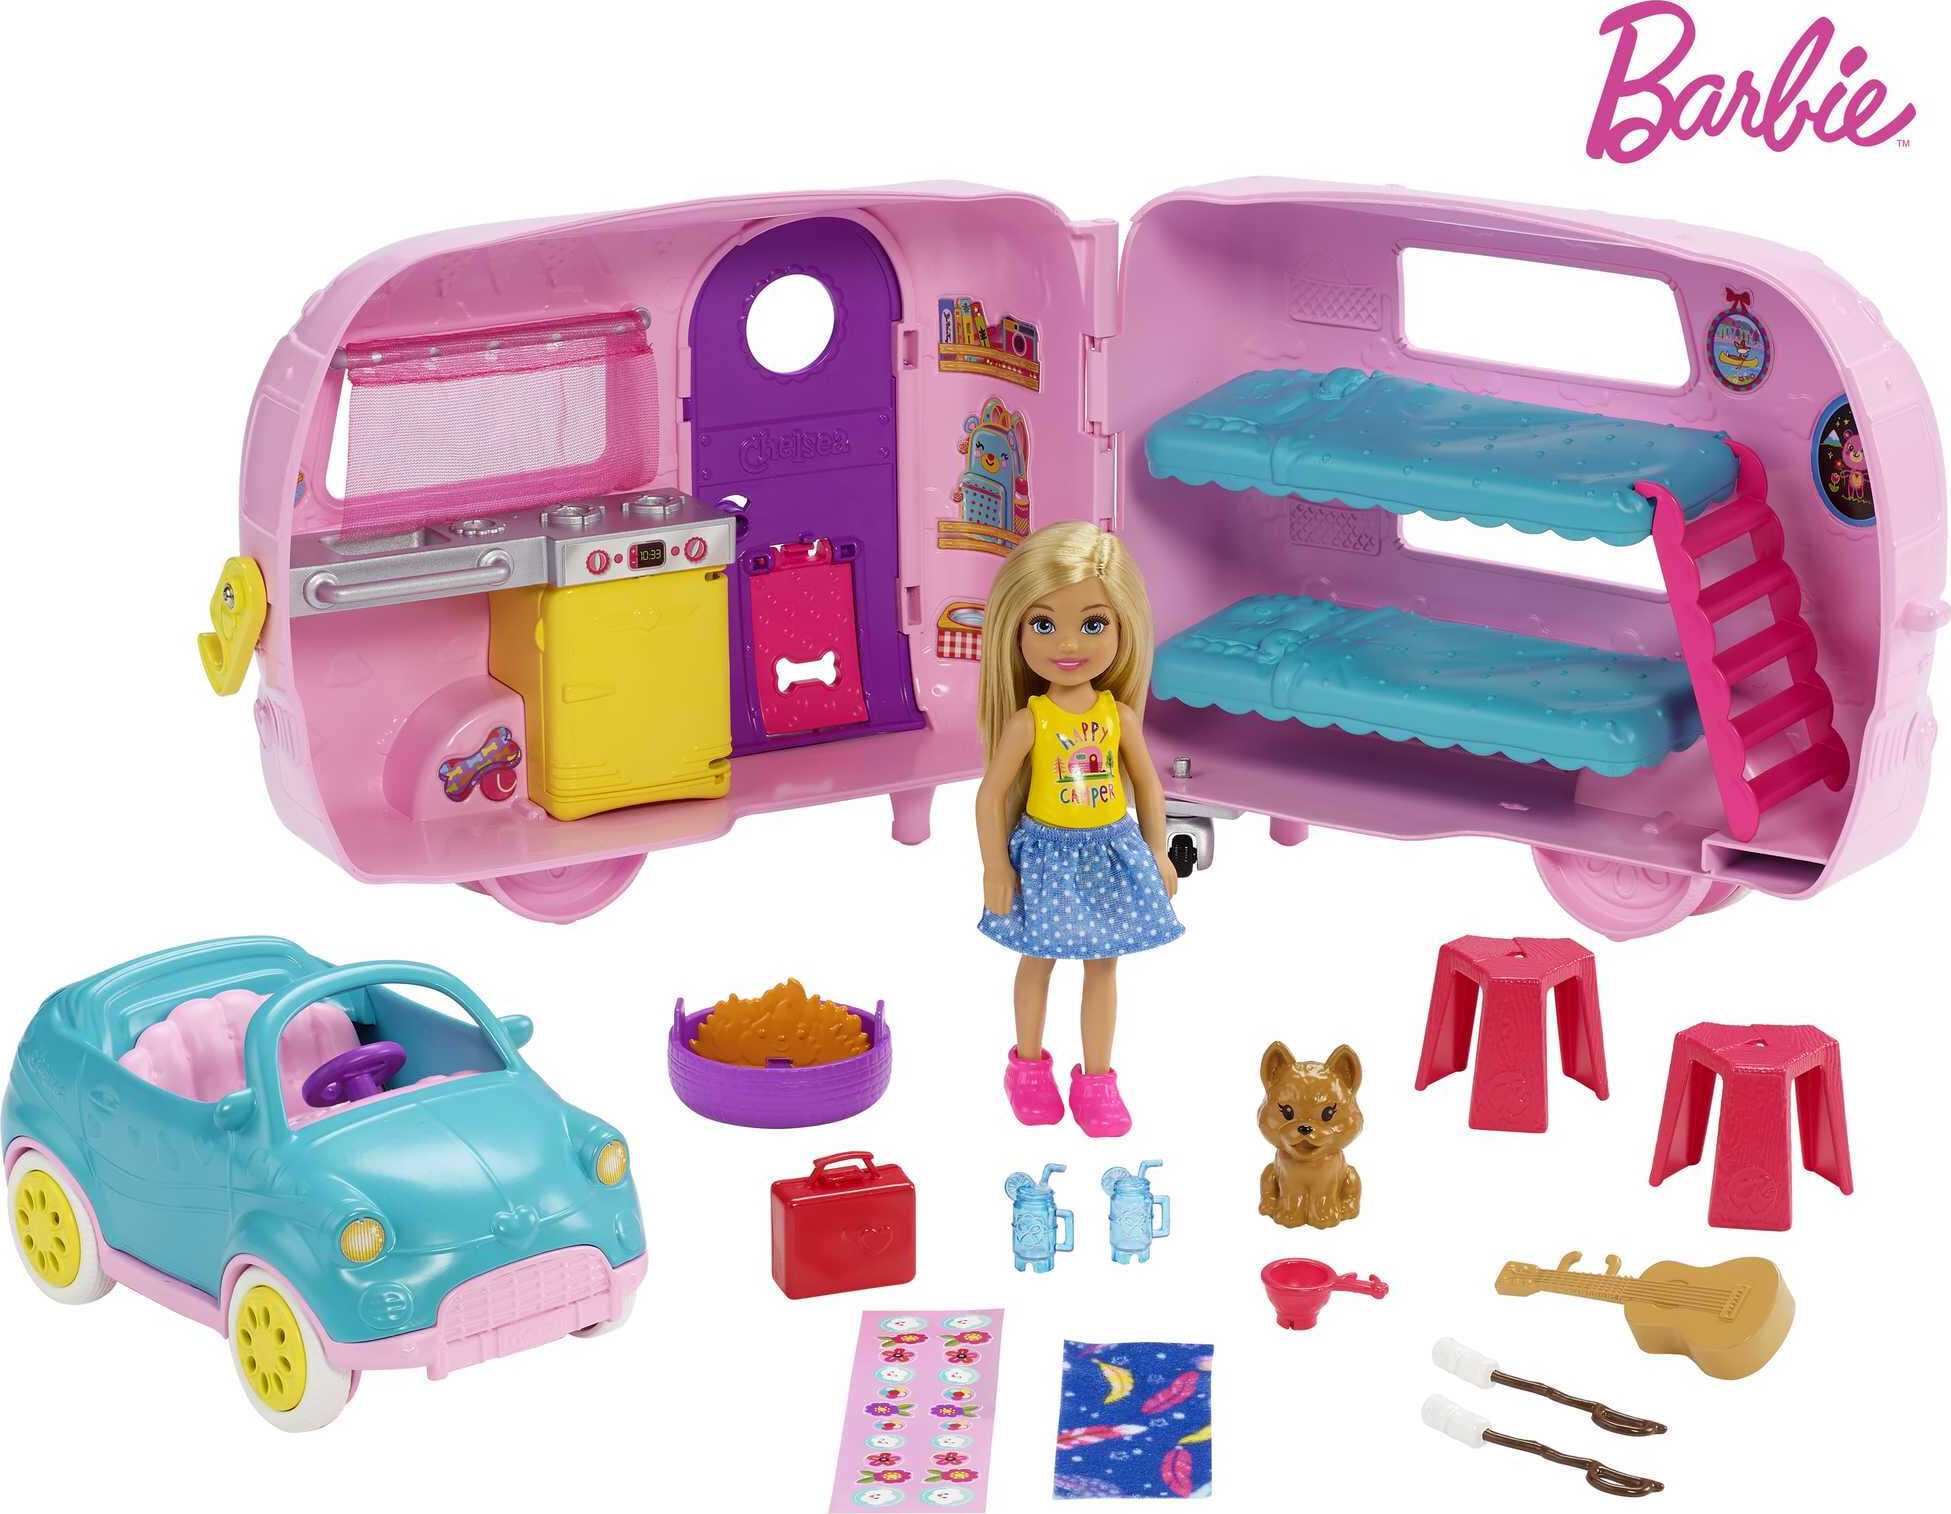 Accessories Airplane Plane Holiday Gift NEW Barbie Estate Dreamplane Playset 15 